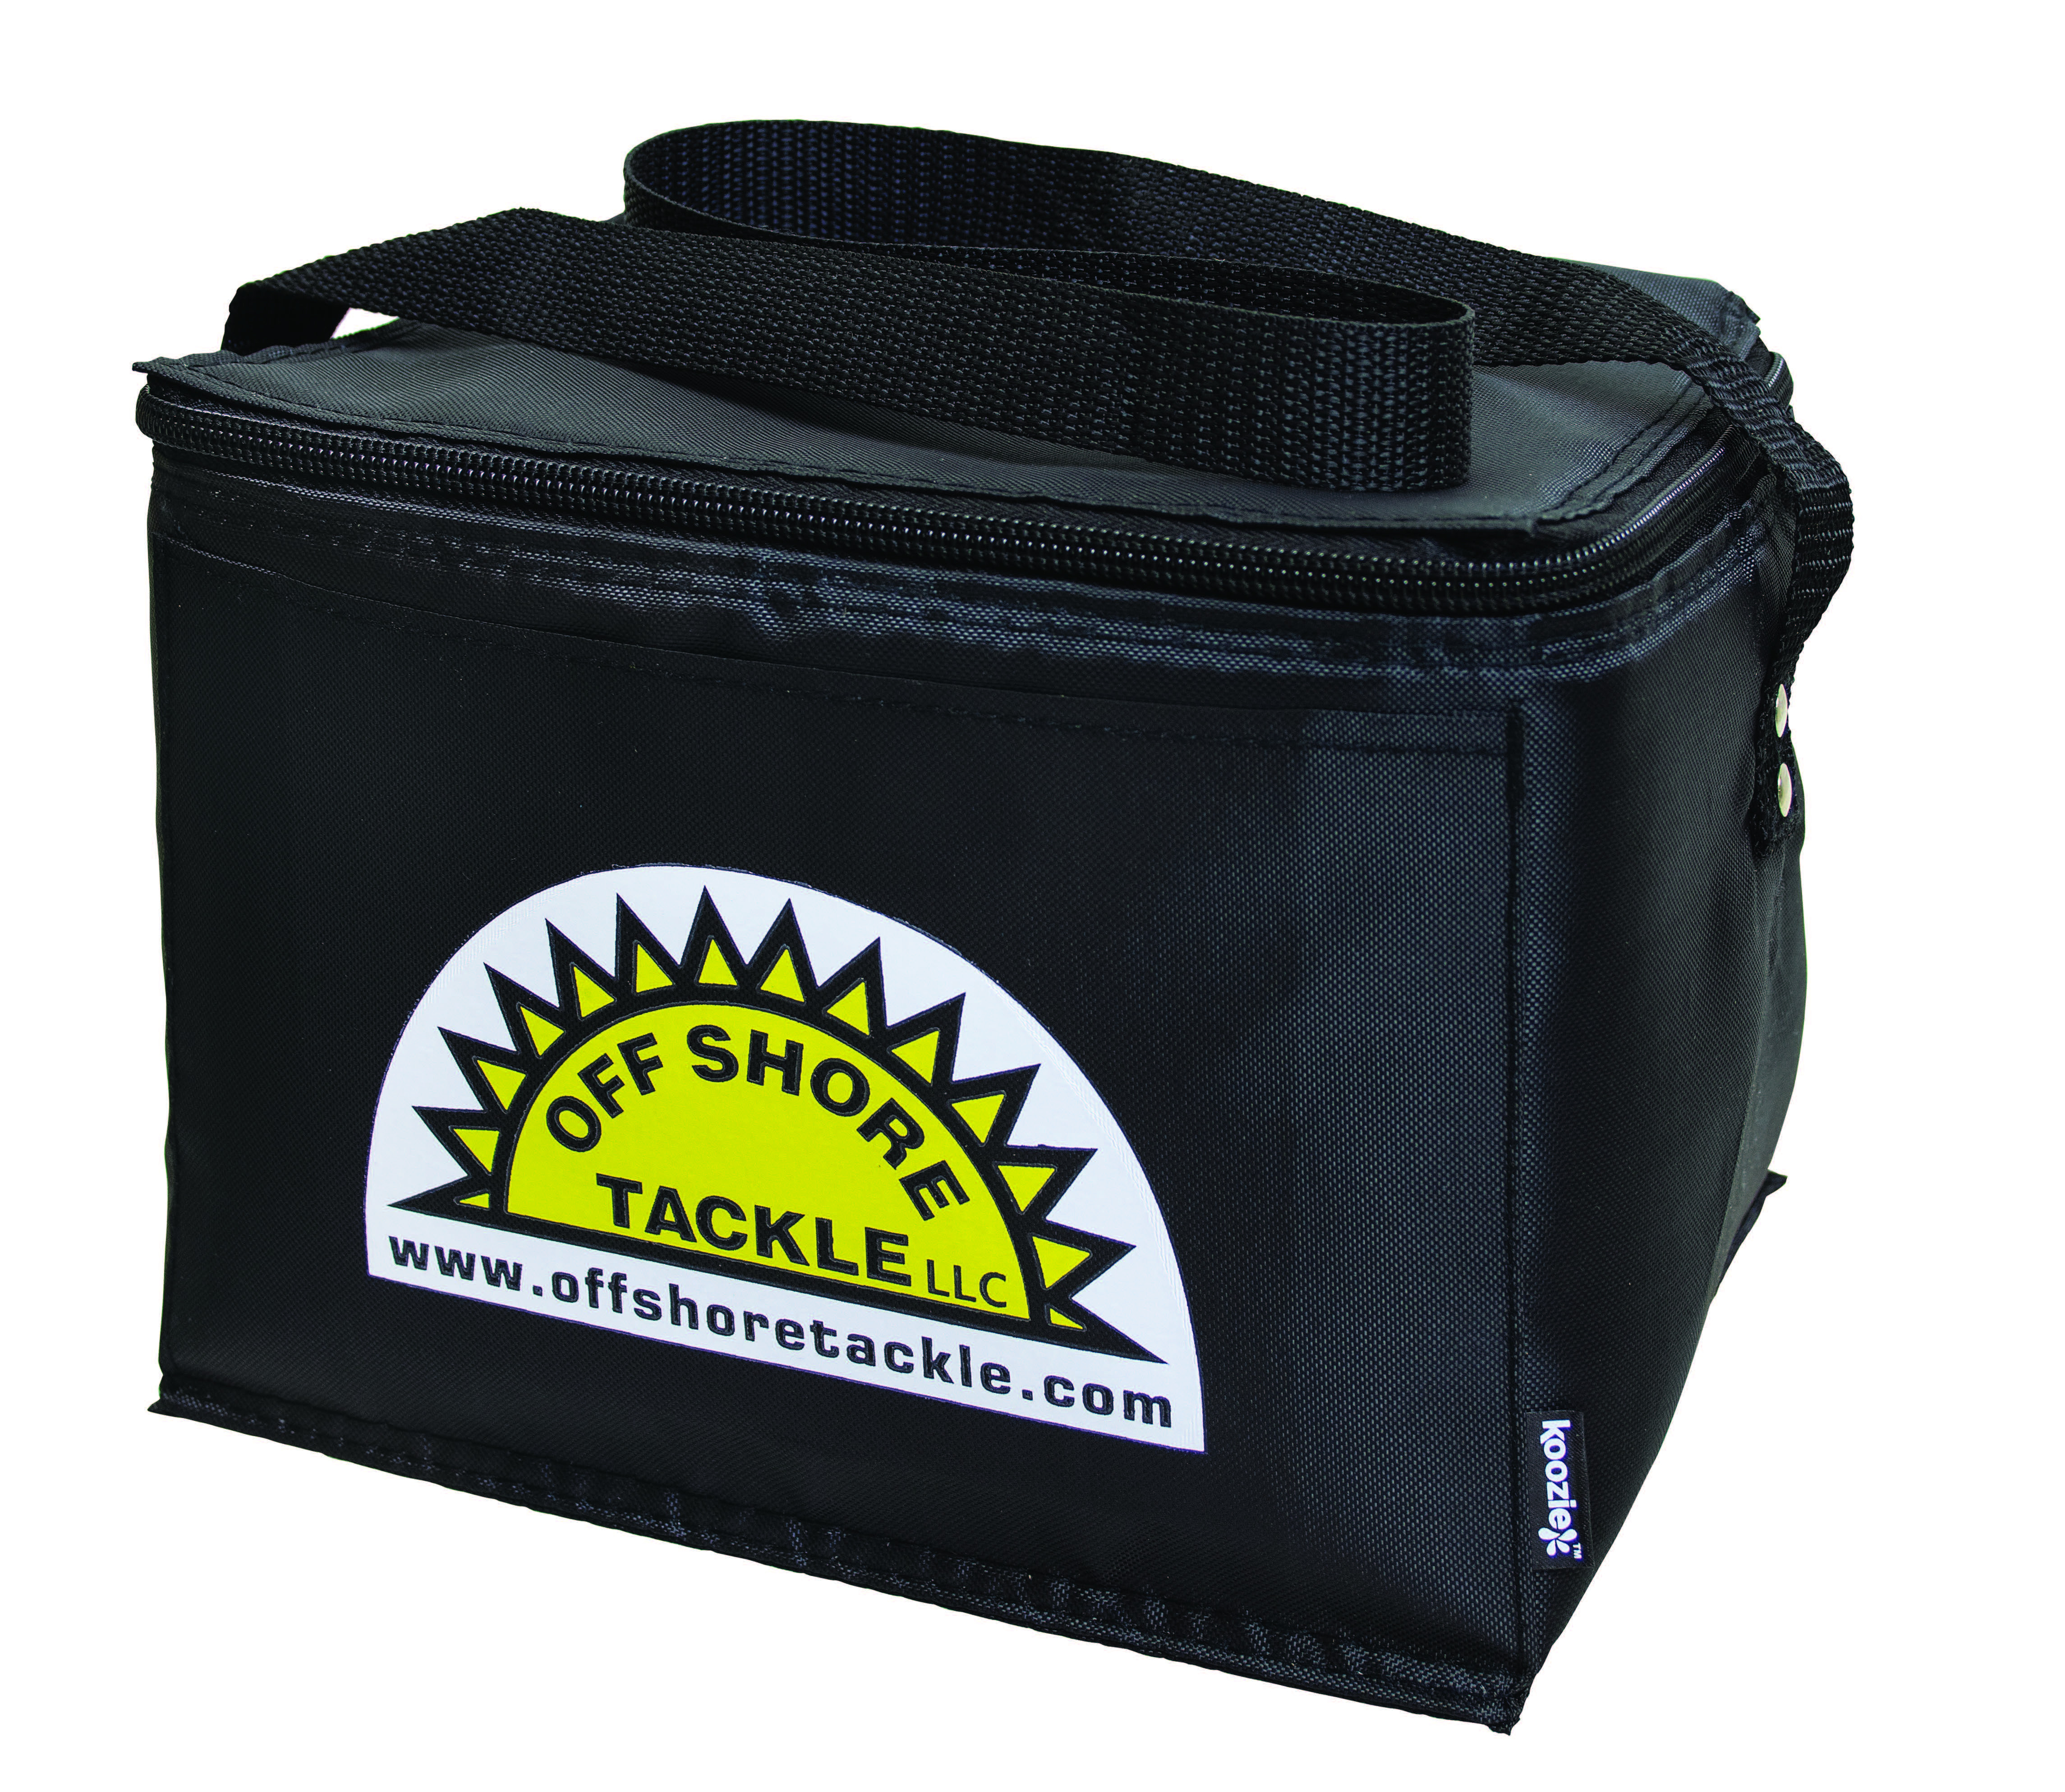 Off Shore Tackle Black Soft 6 Pack Cooler With Front Pocket And Colored  Silkscreen Logo - CLR